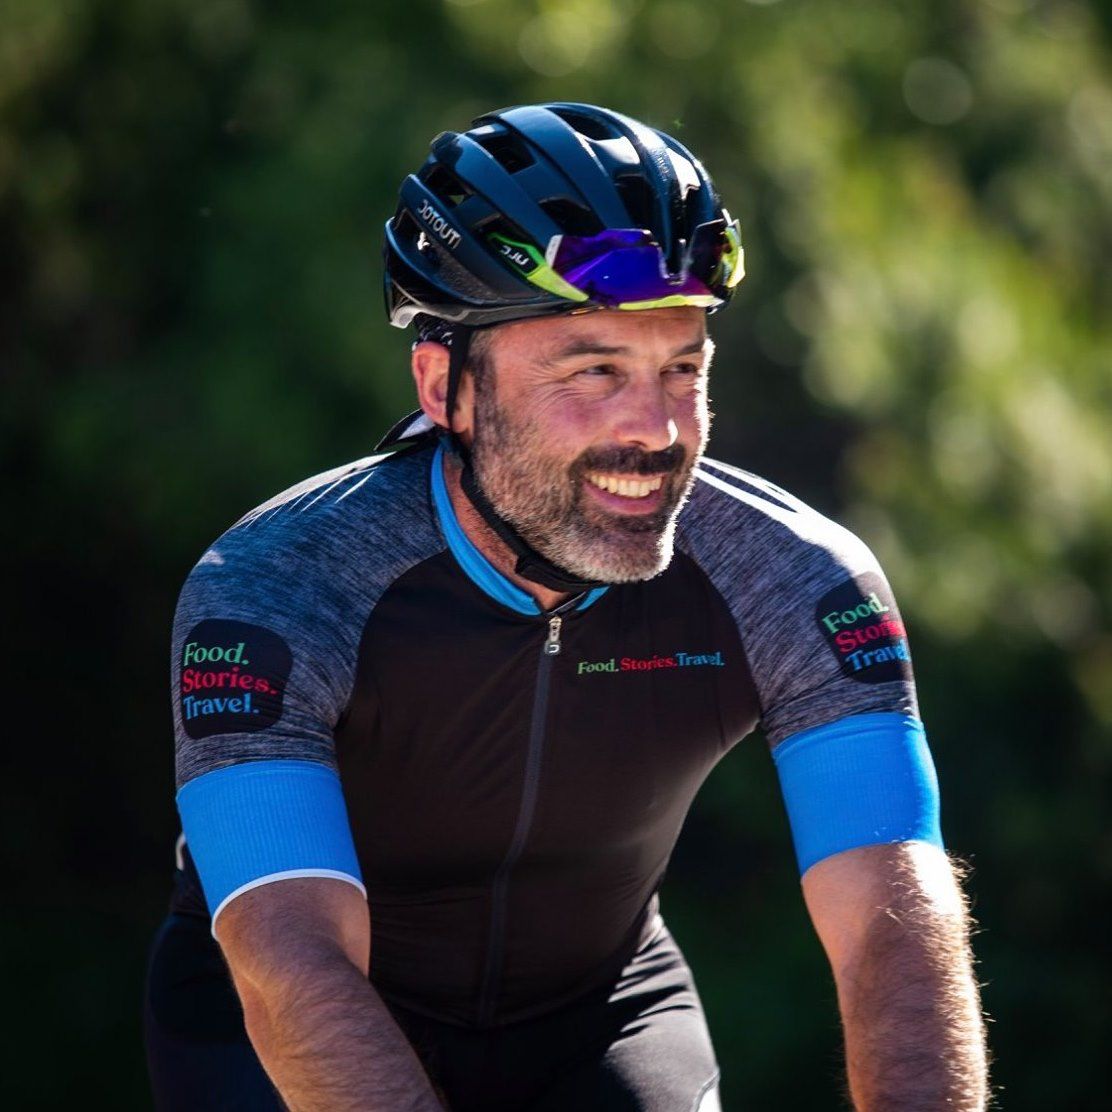 DAVIDE MARCHEGIANO – Tour Leader and Operations